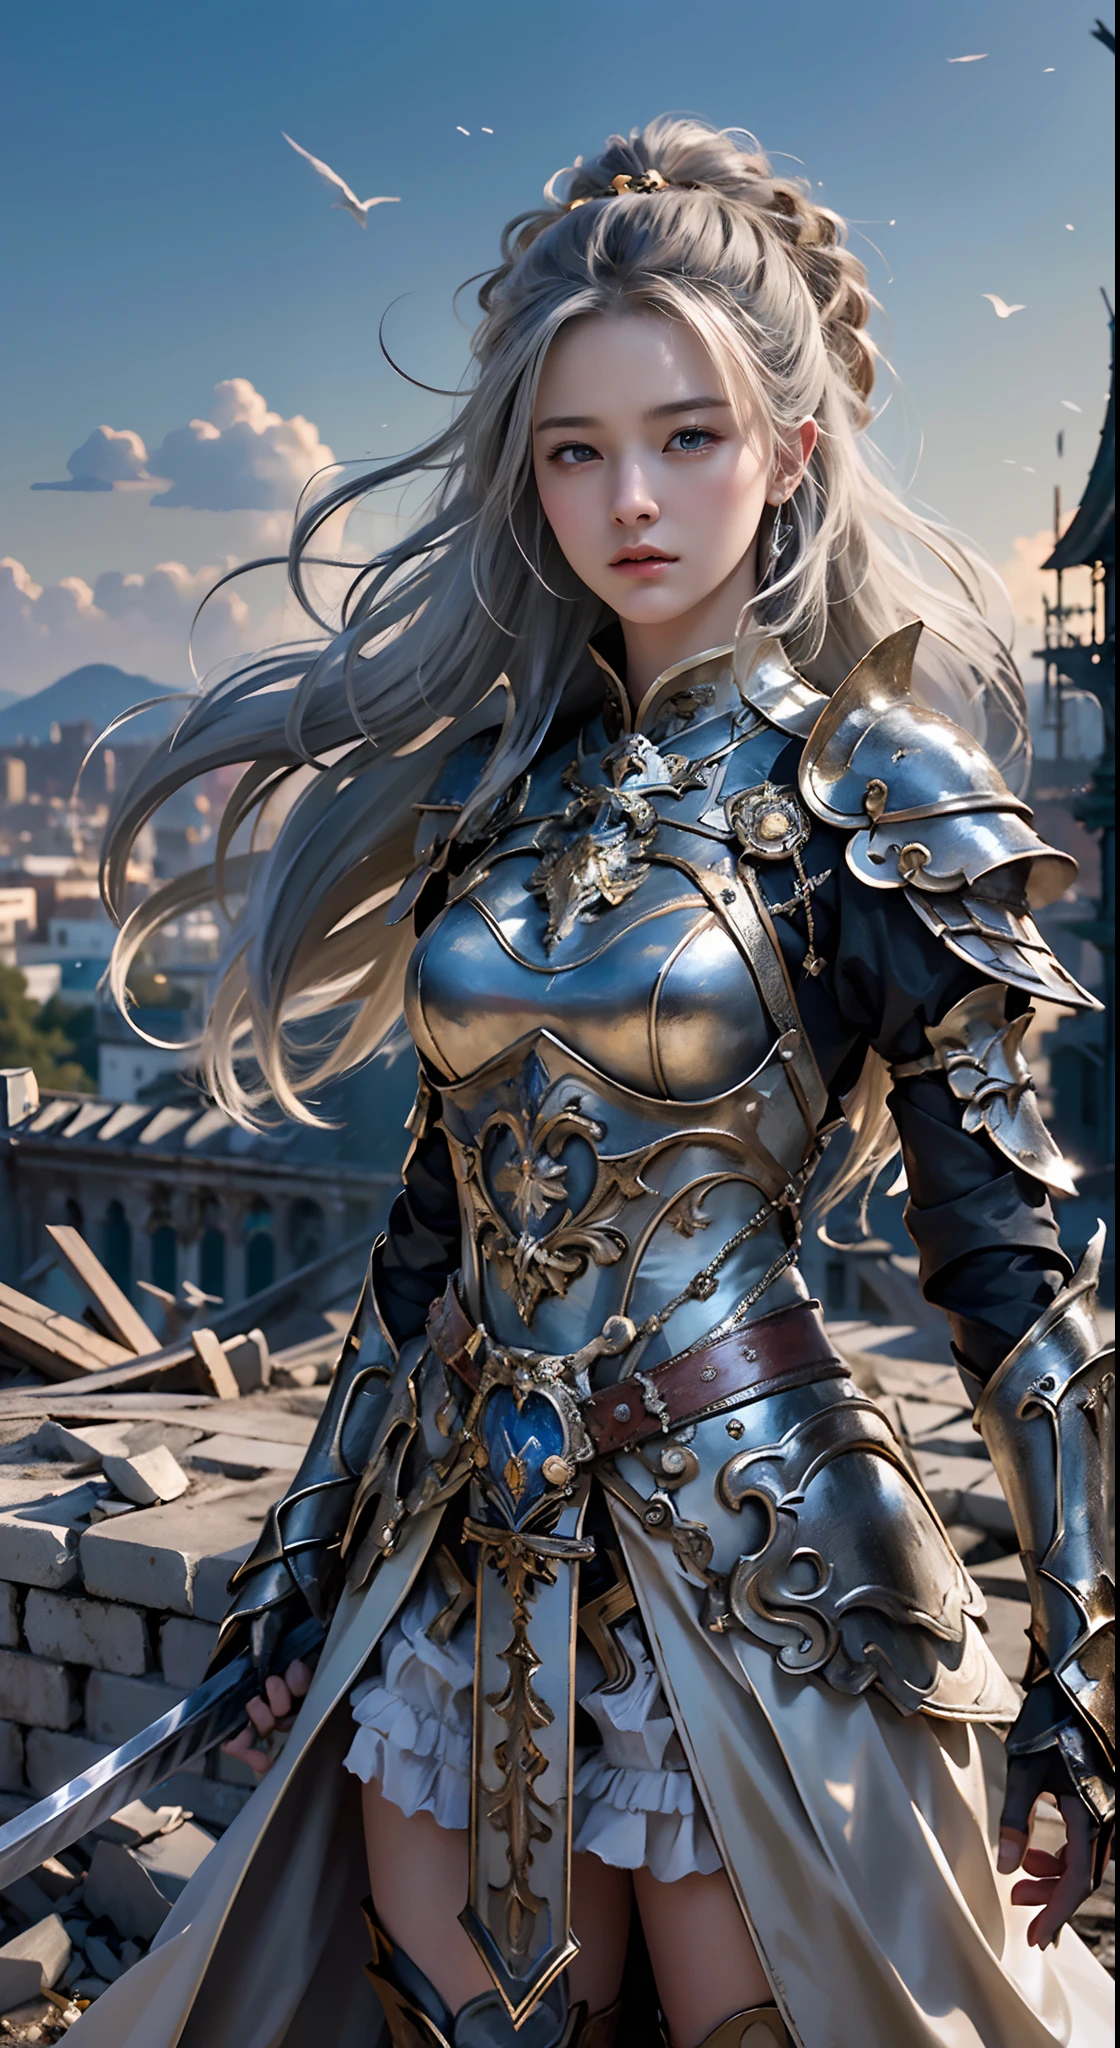 Masterpiece, ((1girl, standing on ruined buildings, close-up, realistic)), realistic visuals, artistic refinement, captivating beauty, dramatic contrasts, 8k wallpapers, absurdity, incredible absurdity, golden armor, gadaxintai gaodanvshen, (holding silver sword)), hair floating in the air, ((in battle)), ((best quality: 1.5))